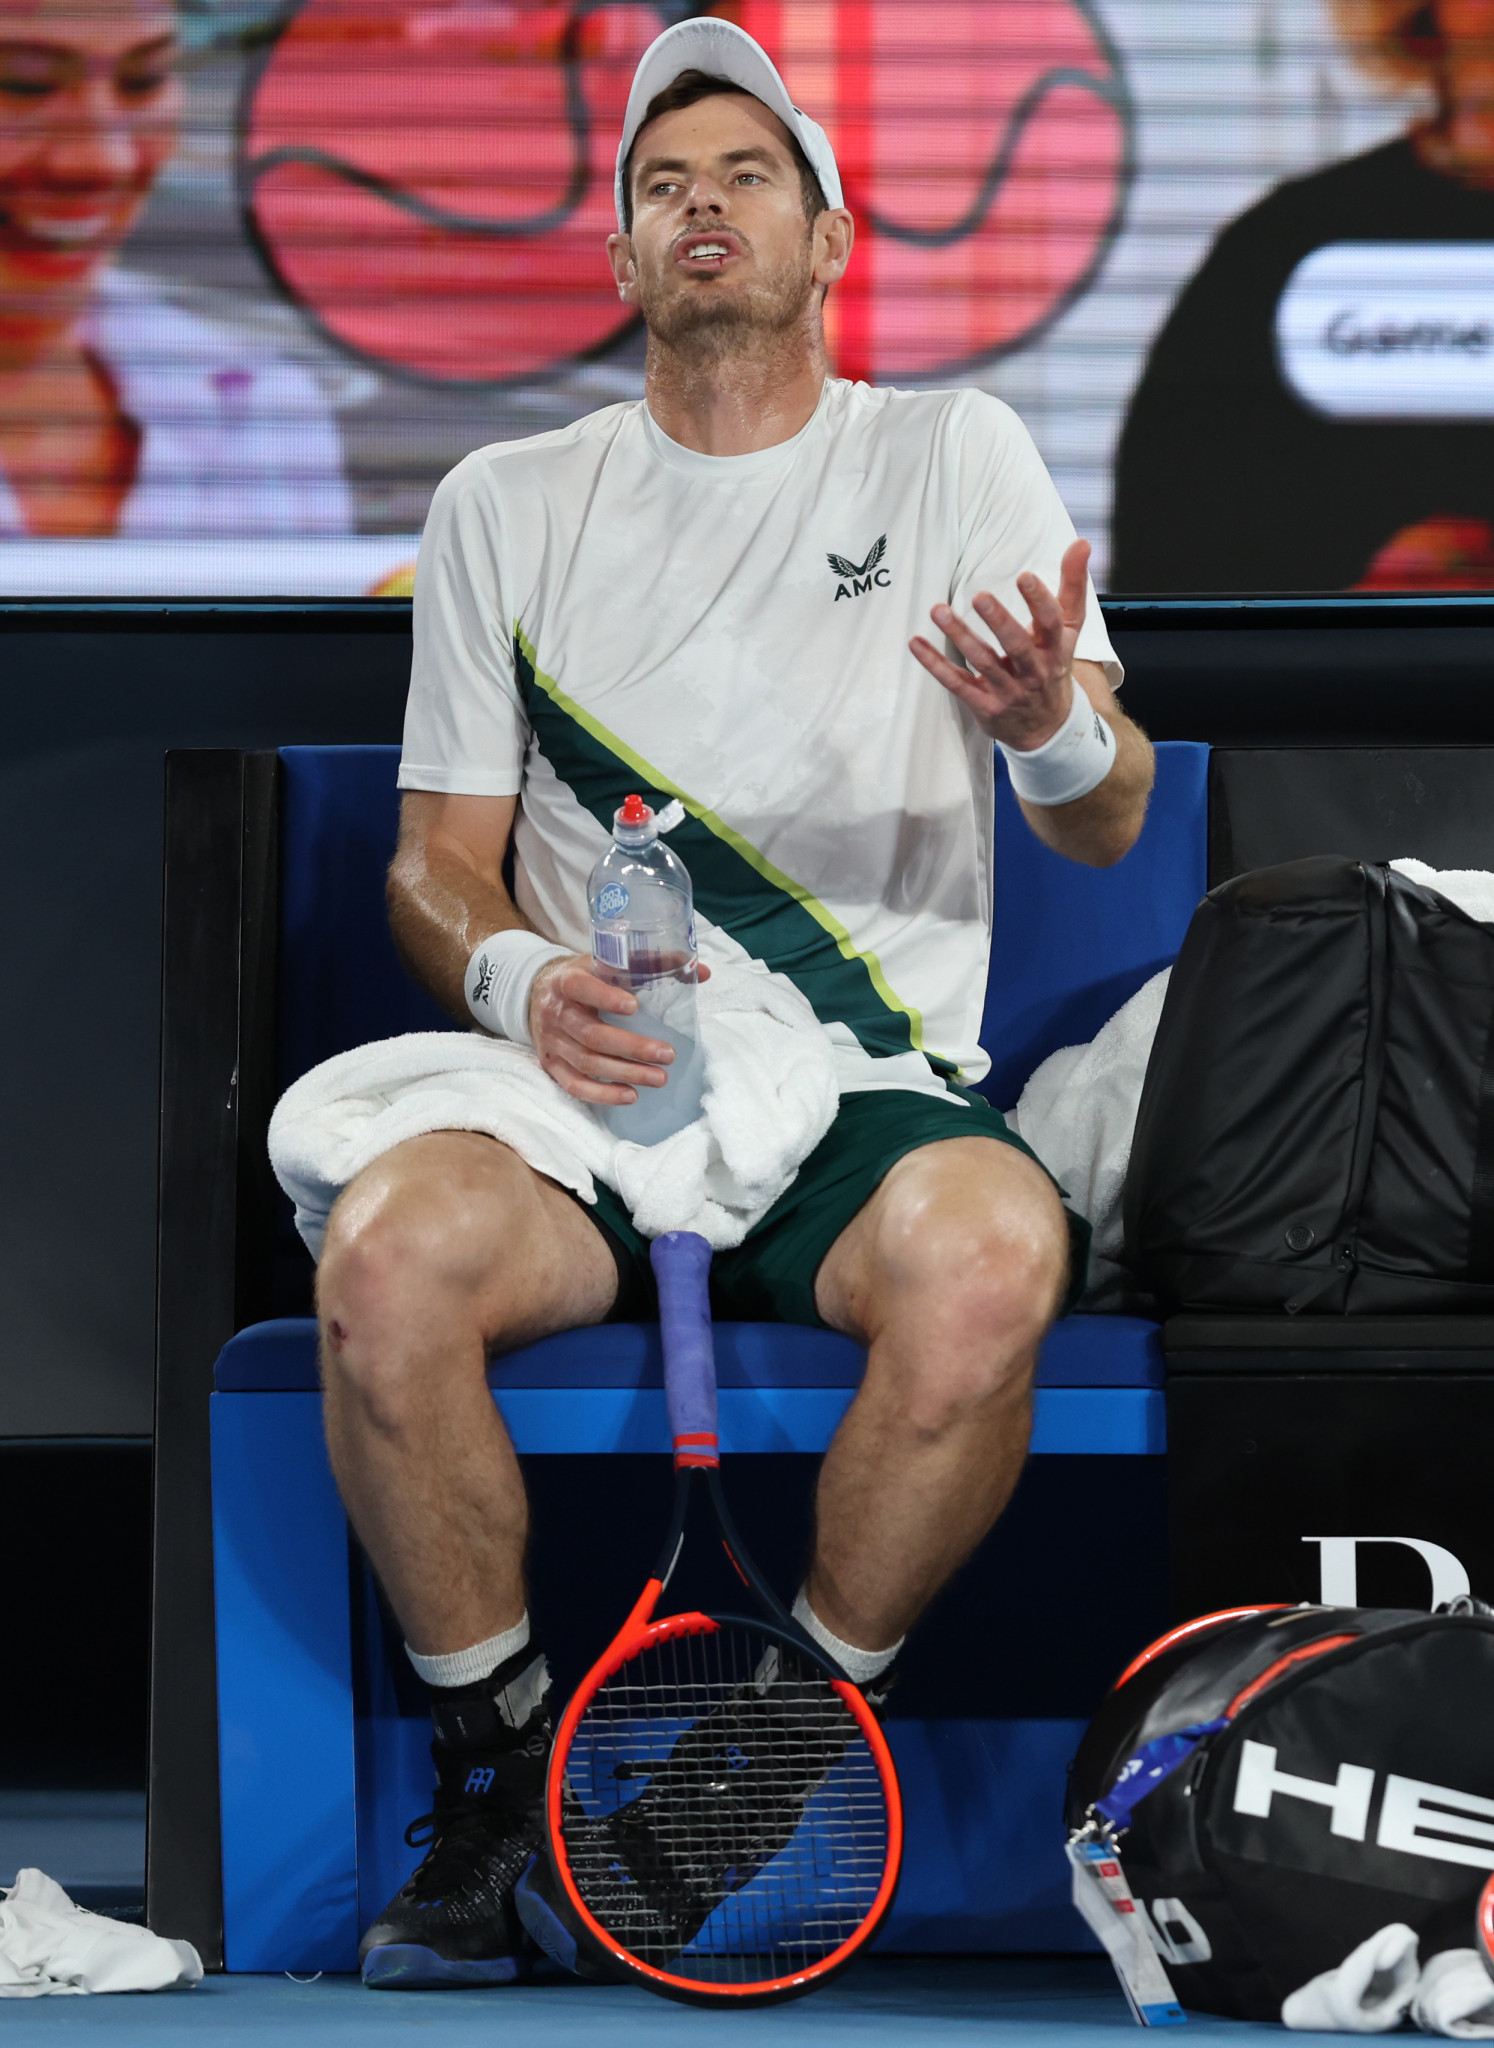 Britain's Sir Andy Murray said he didn't know who the late finish in his Australian Open match was beneficial for ©Getty Images